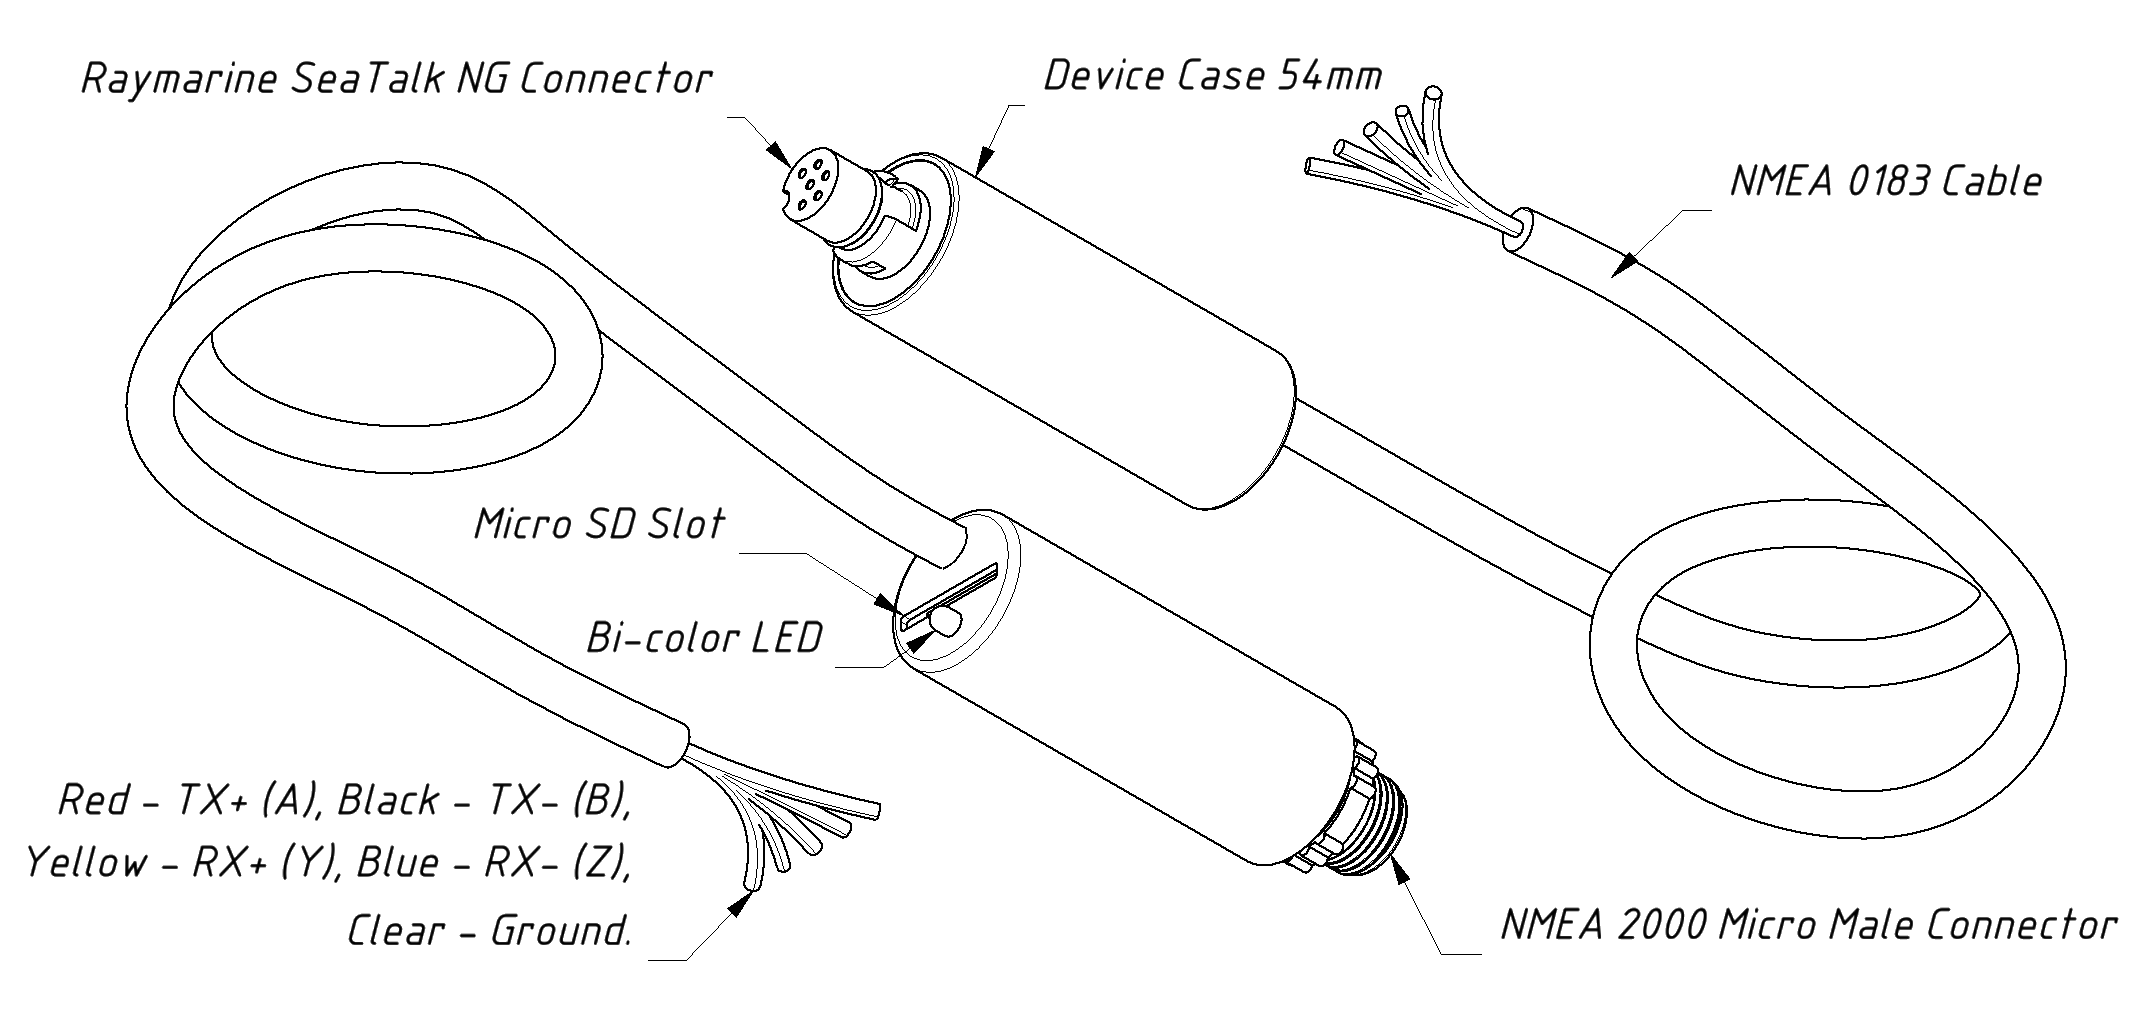 Drawing of YDNG-03N (left) and YDNG-03R (right) models of Gateway